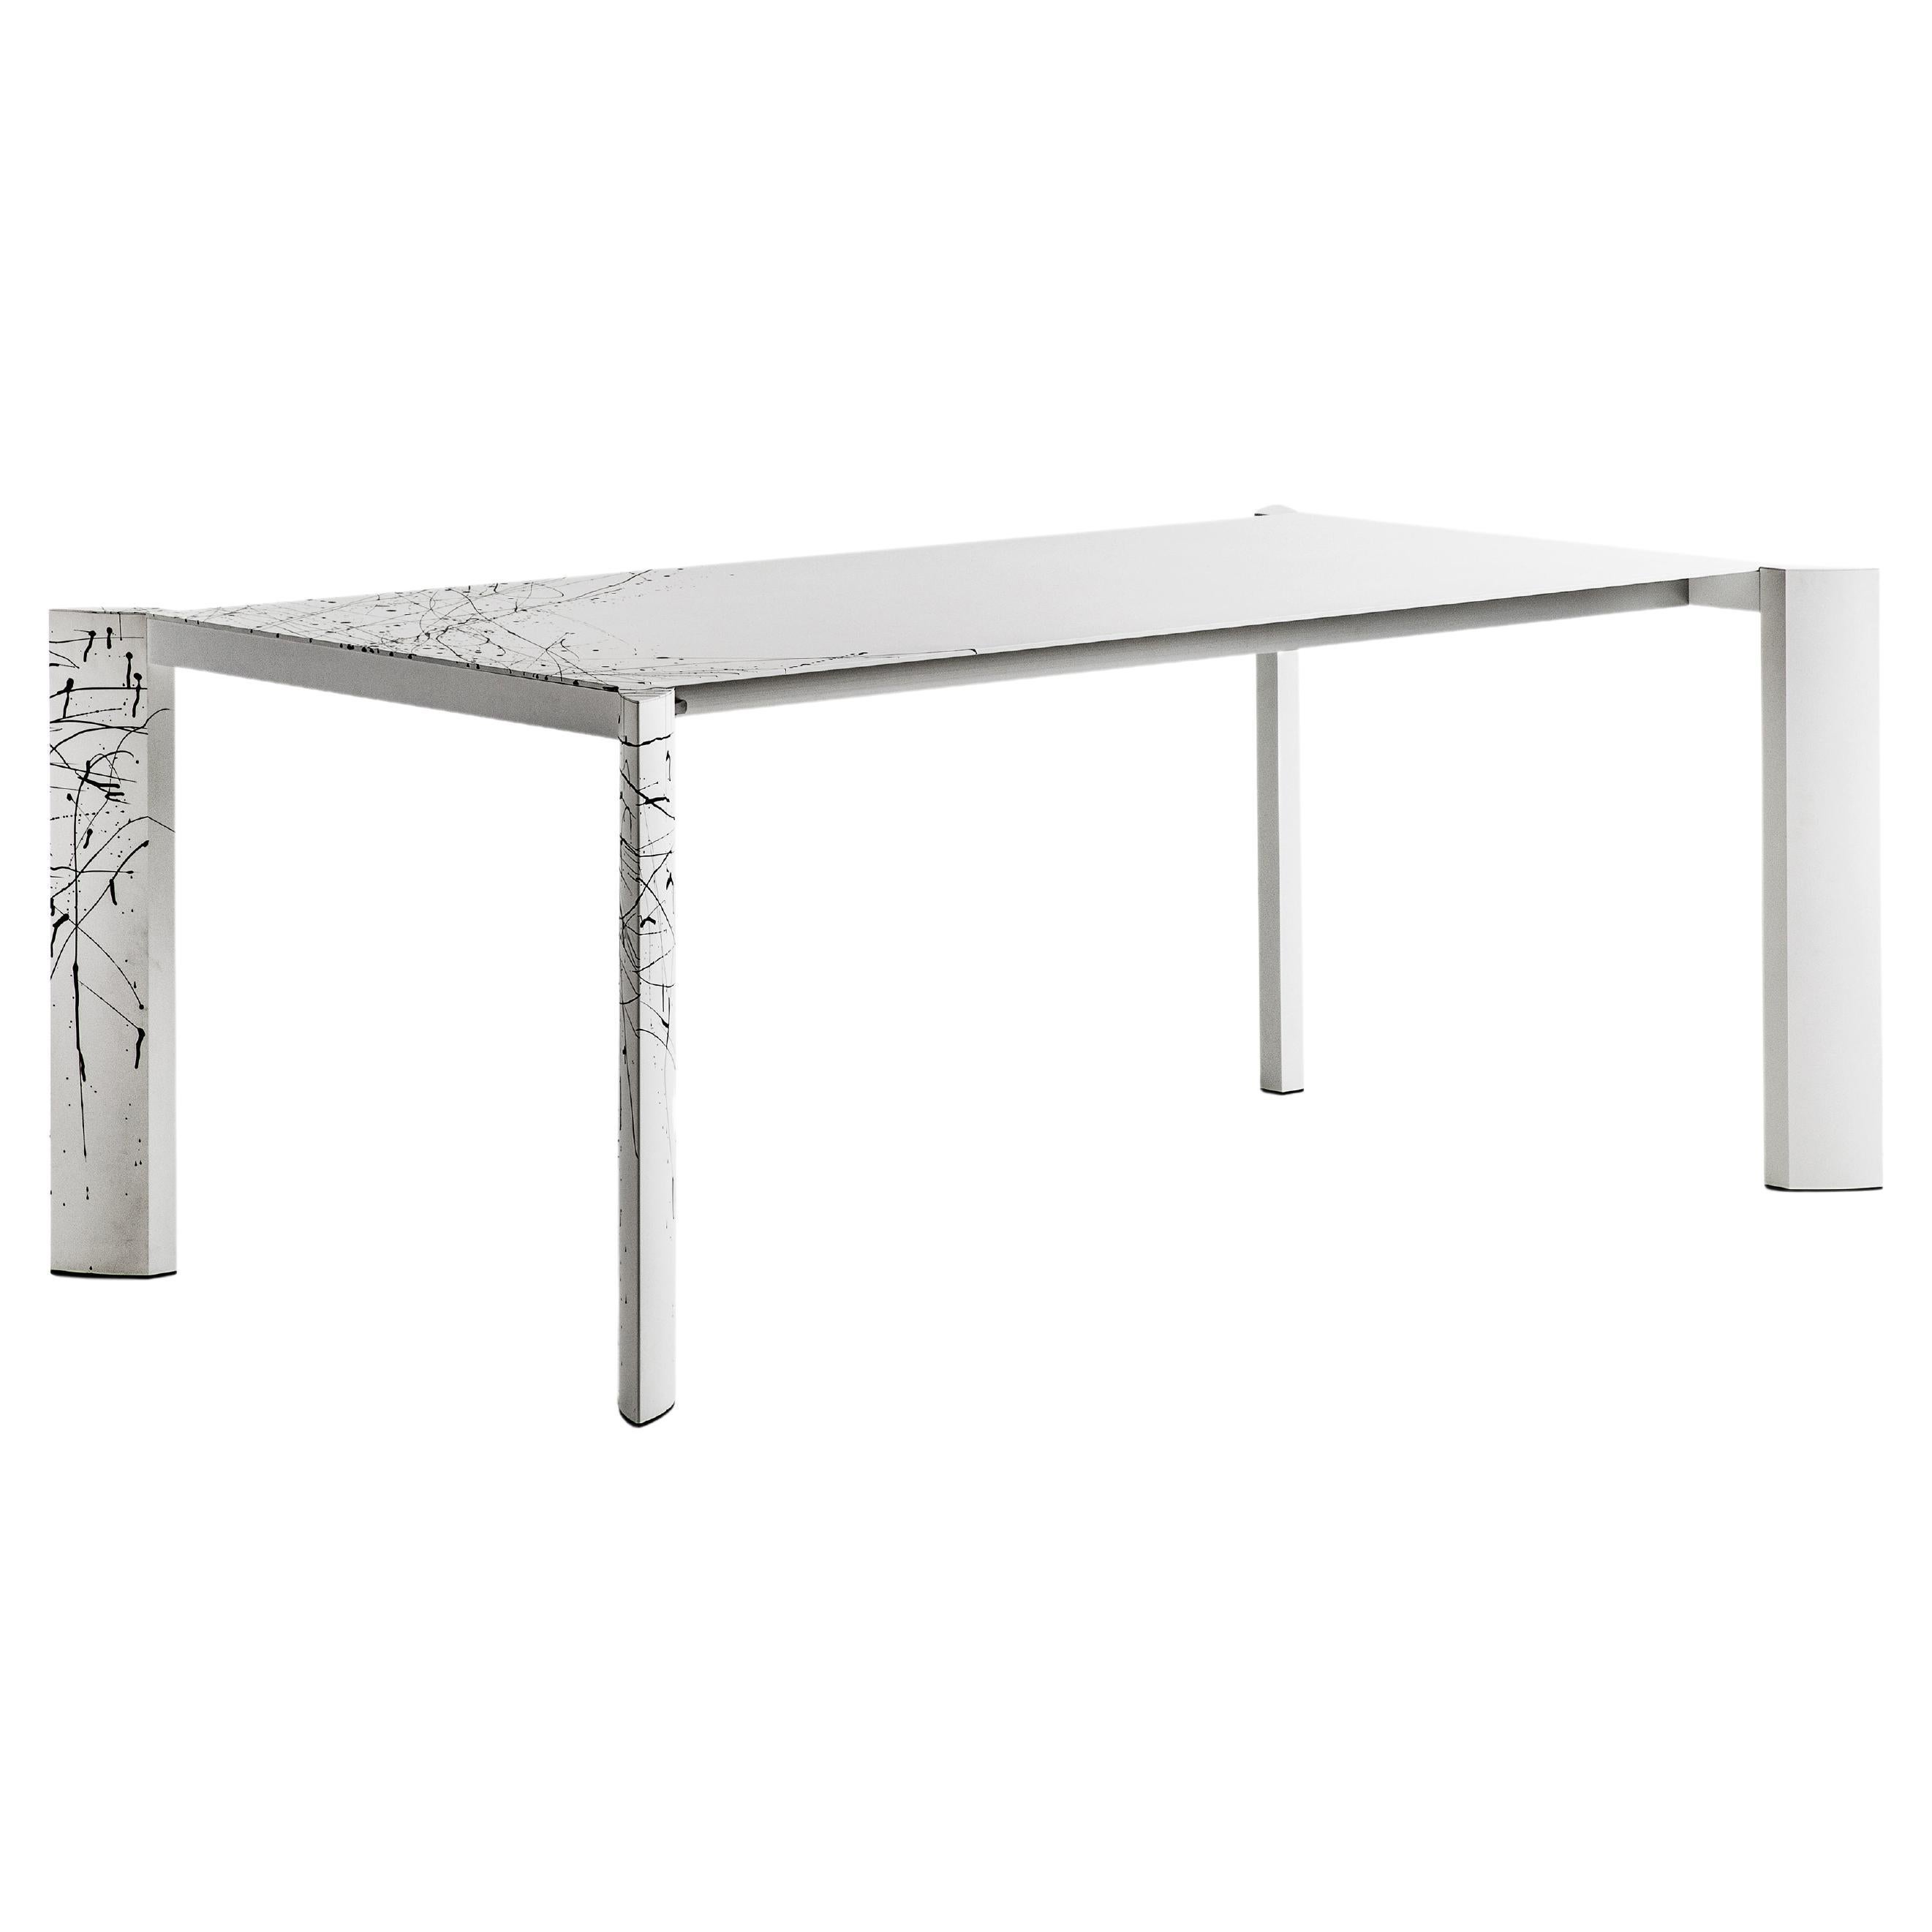 Minimalist Dripping Table Aluminium Extendable White Handpainted Pollock Homage For Sale